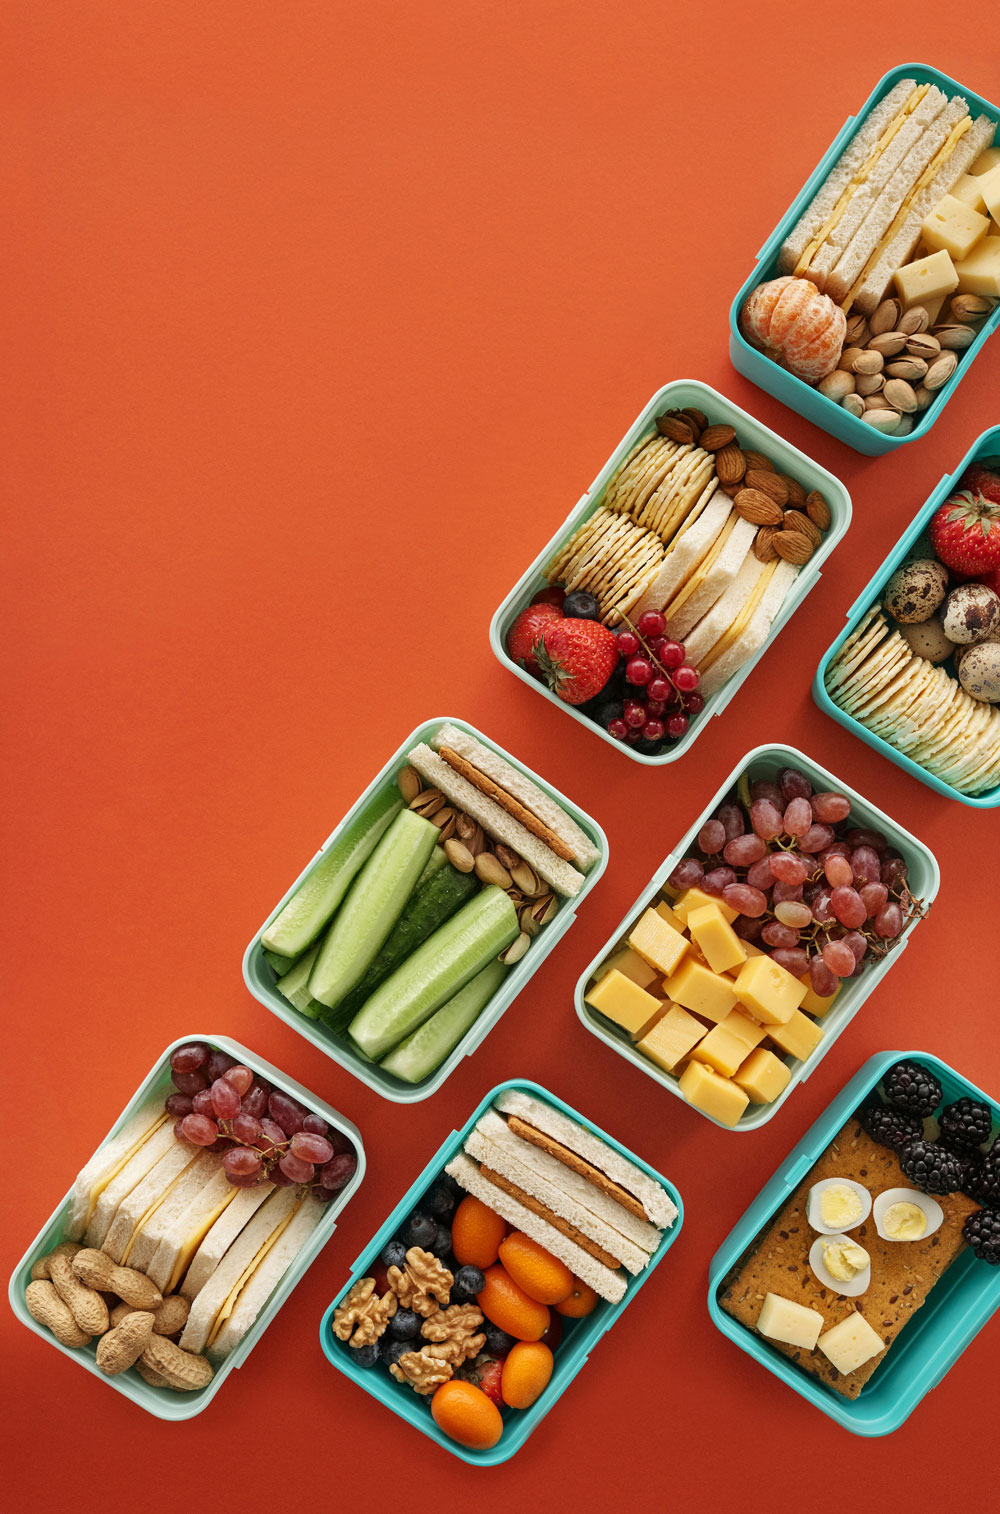 Ideas For Healthy Children's Lunches